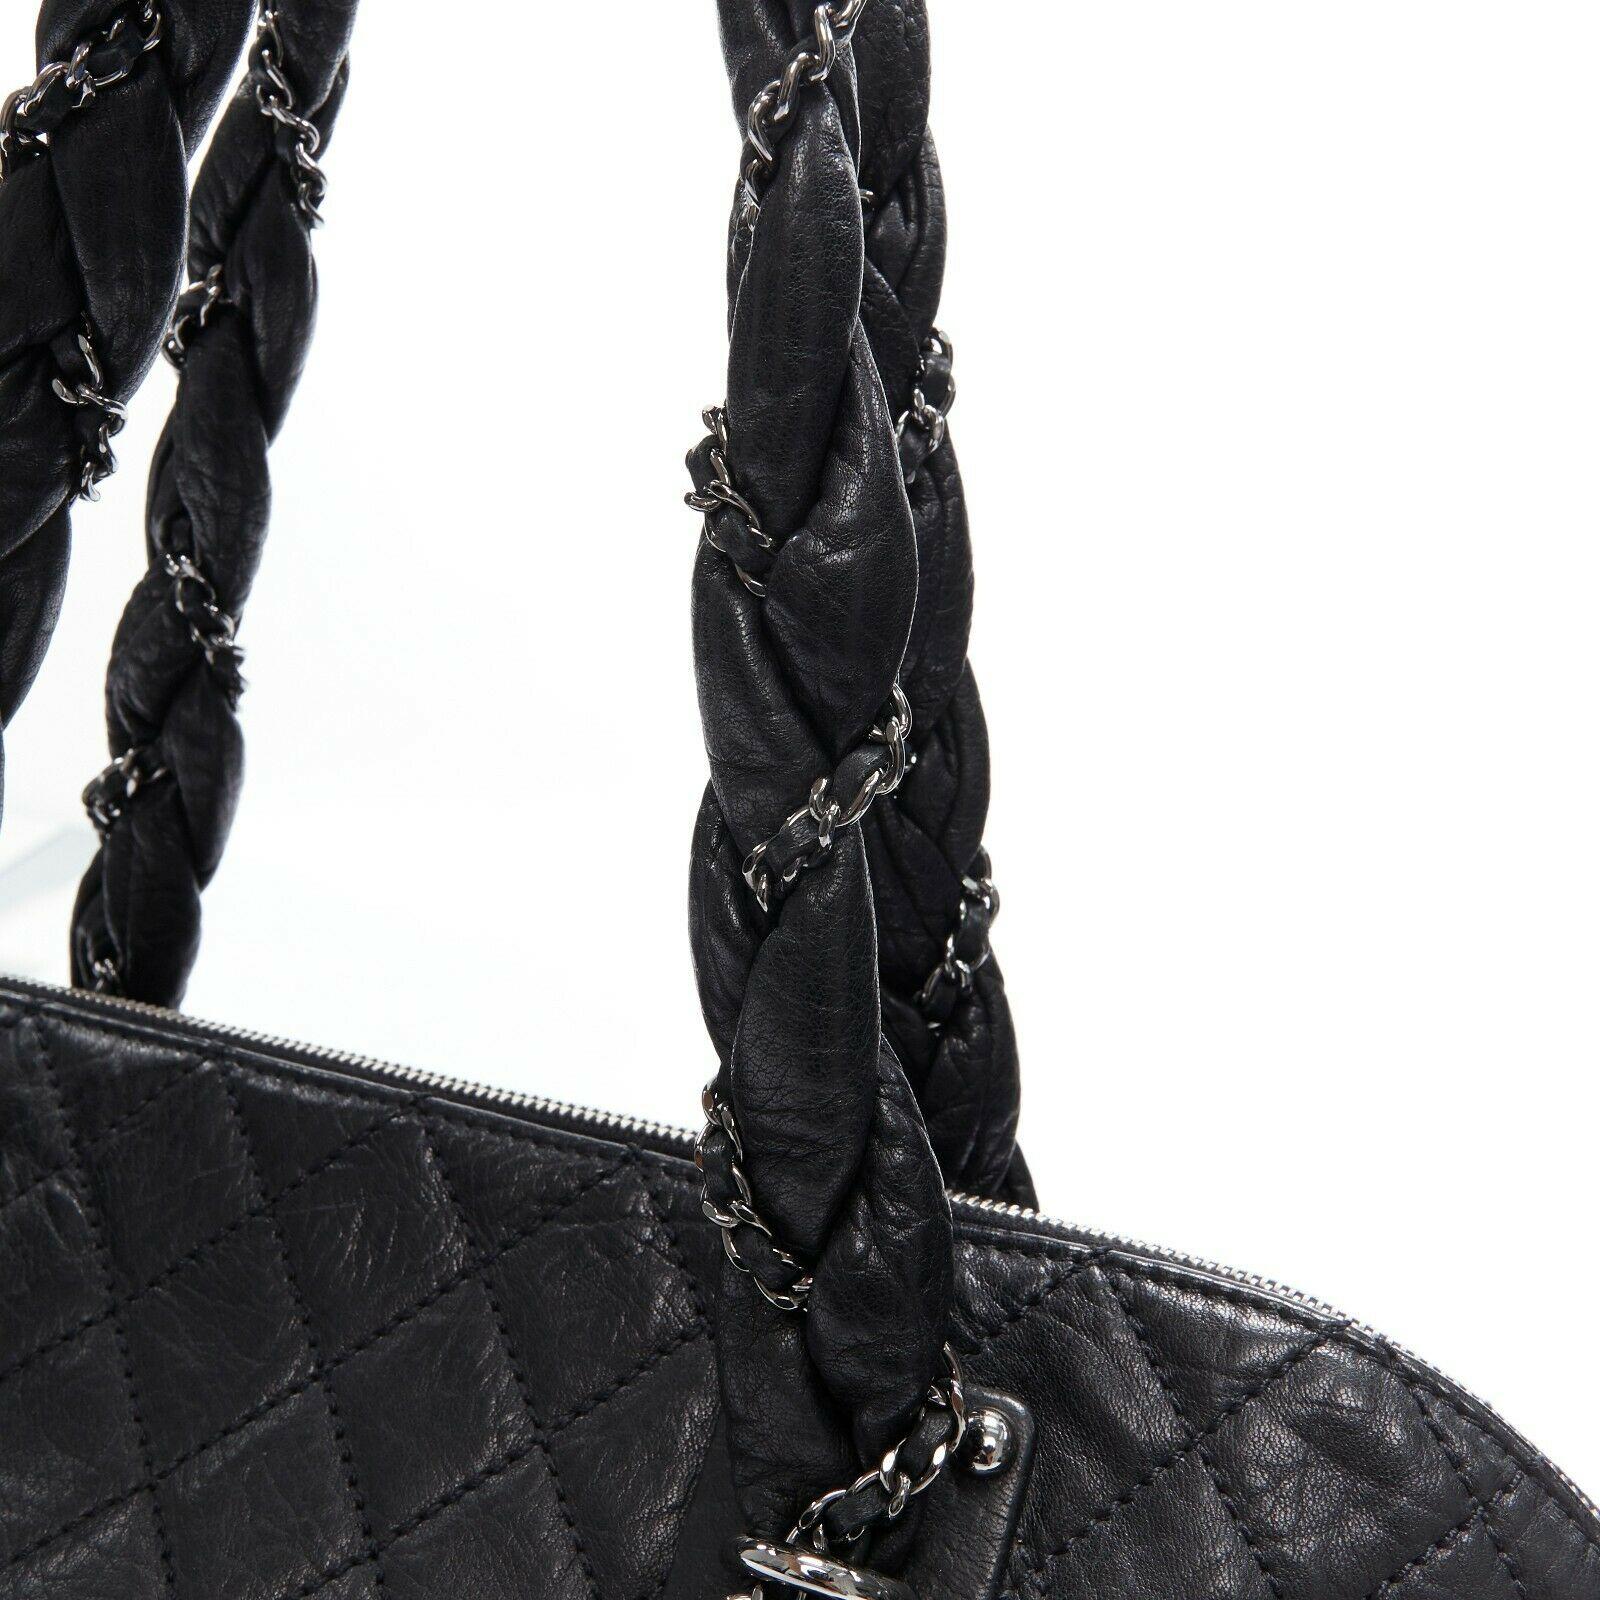 Women's CHANEL black diamond quilted pebbled leather 2.55 braid strap shoulder bag